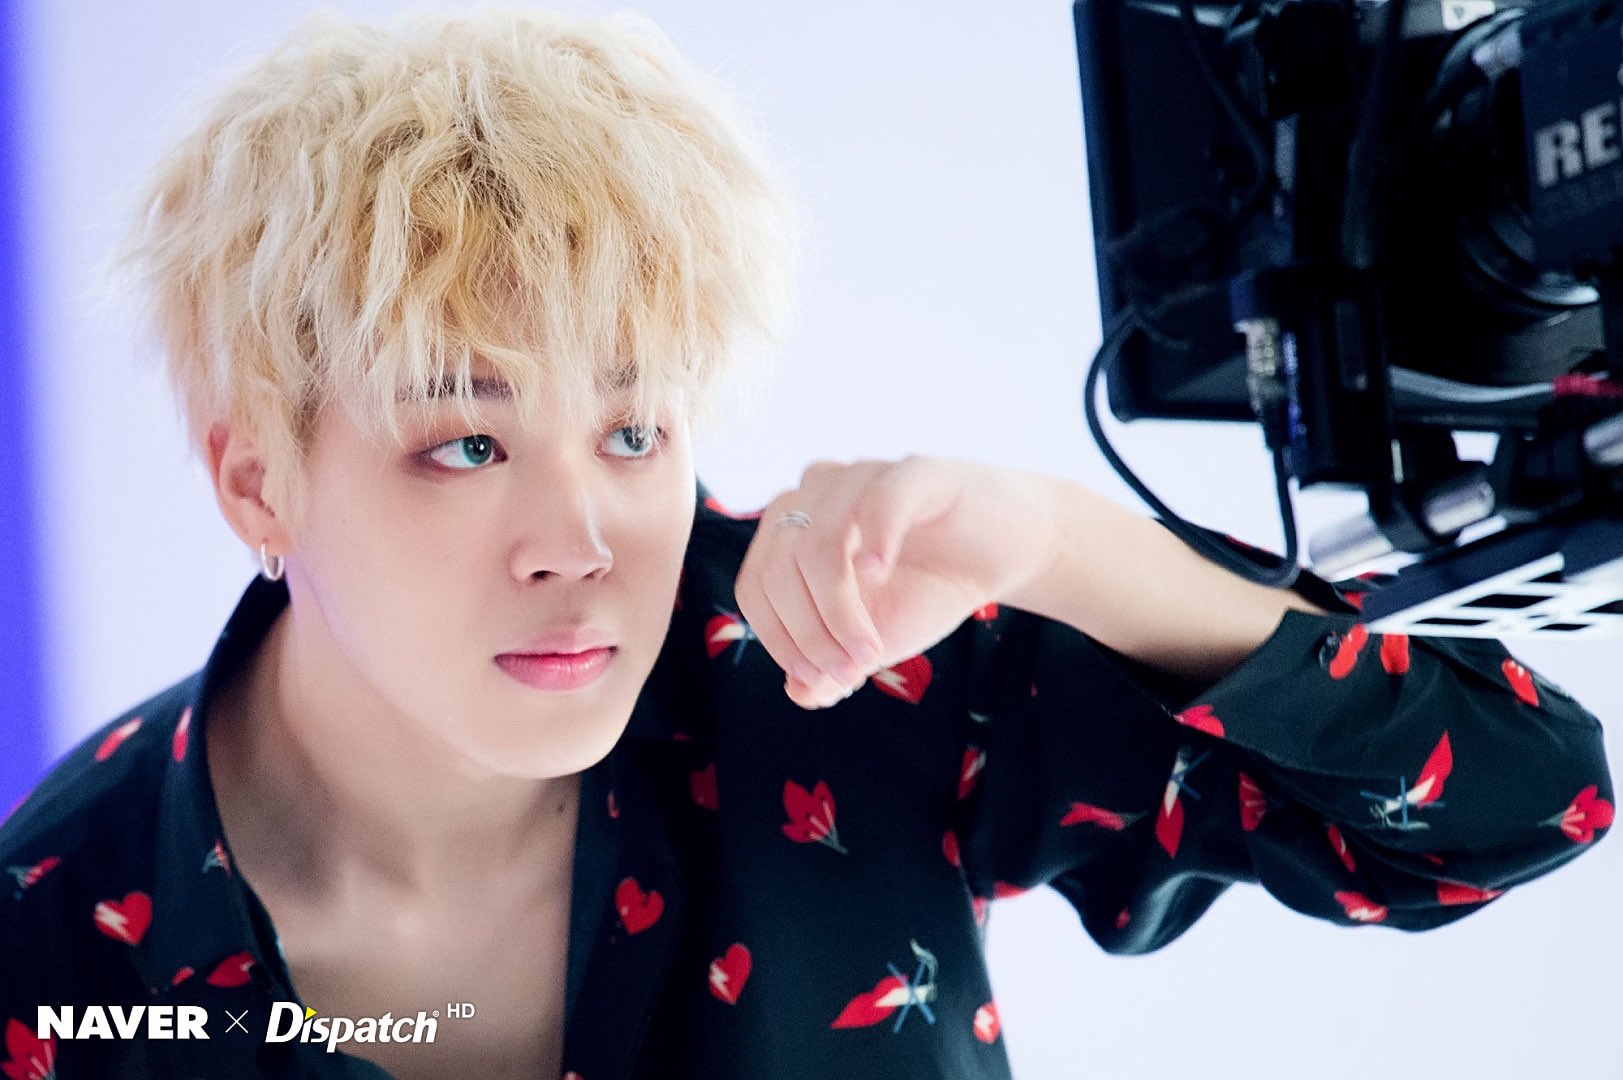 🇰🇷 🇨🇵 📷 [BTS] JIMIN in a photo shoot for the French magazine